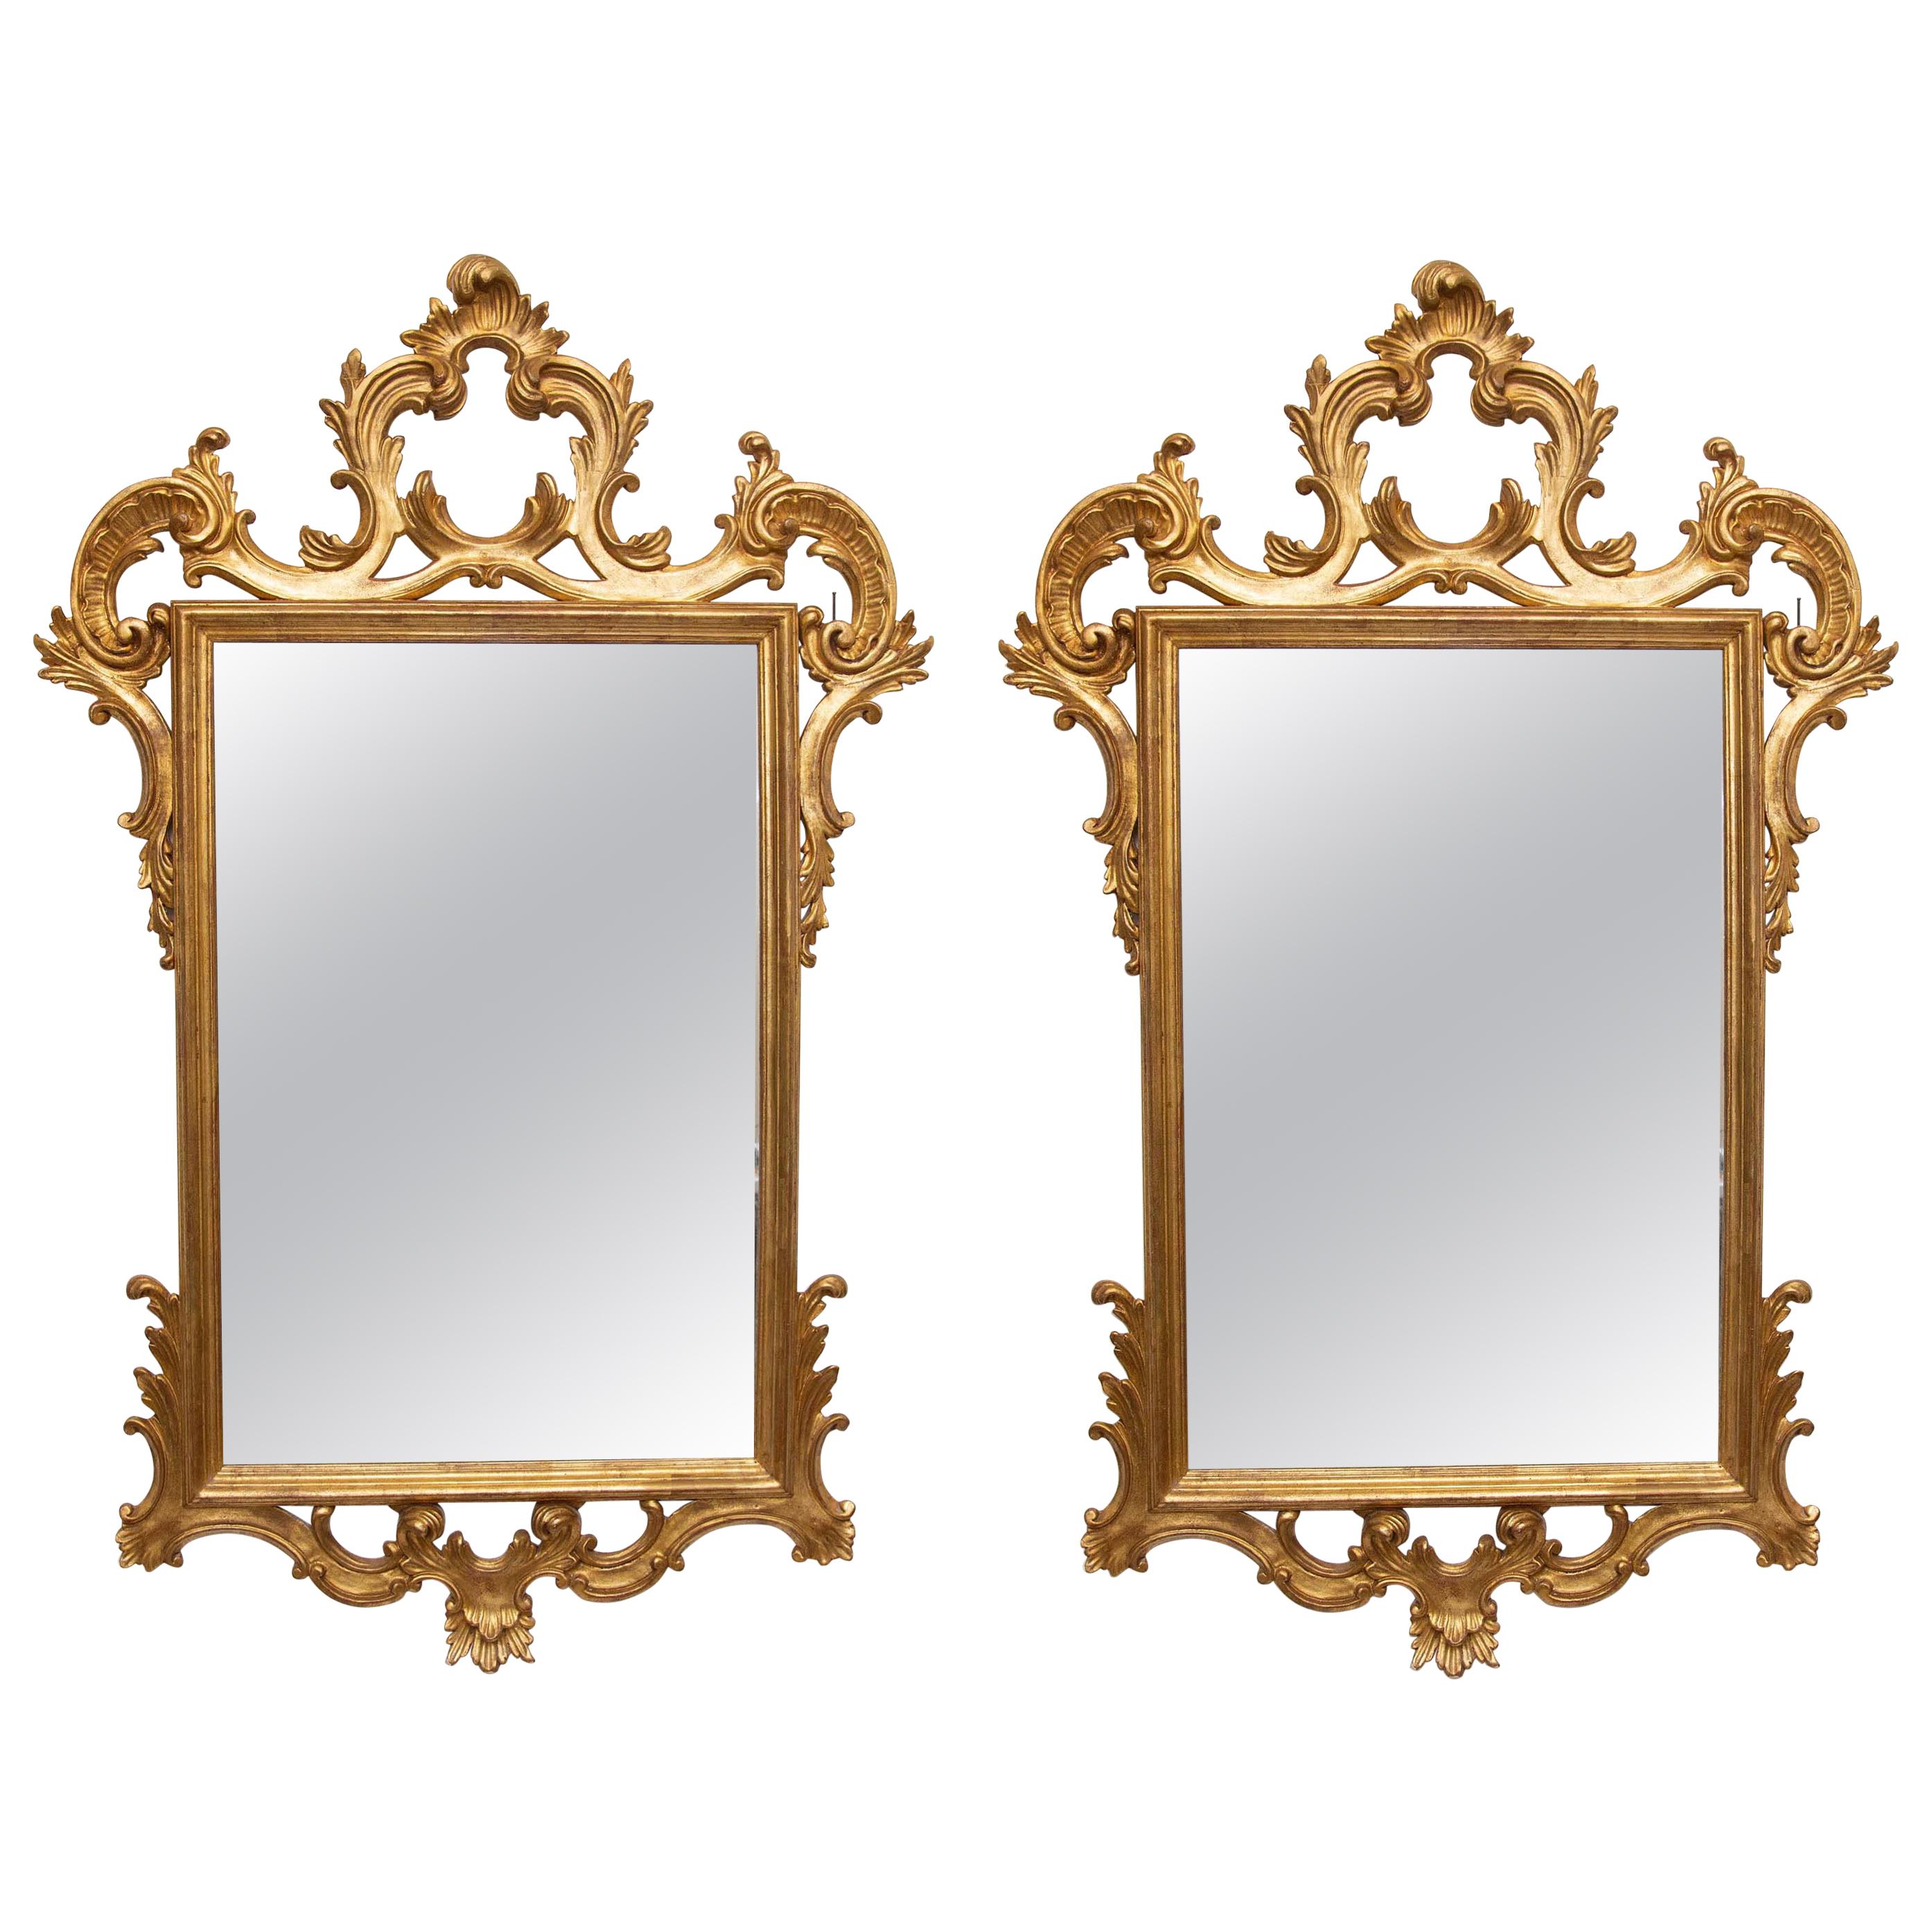 Pair of Carved and Gilt Italian Console Mirrors